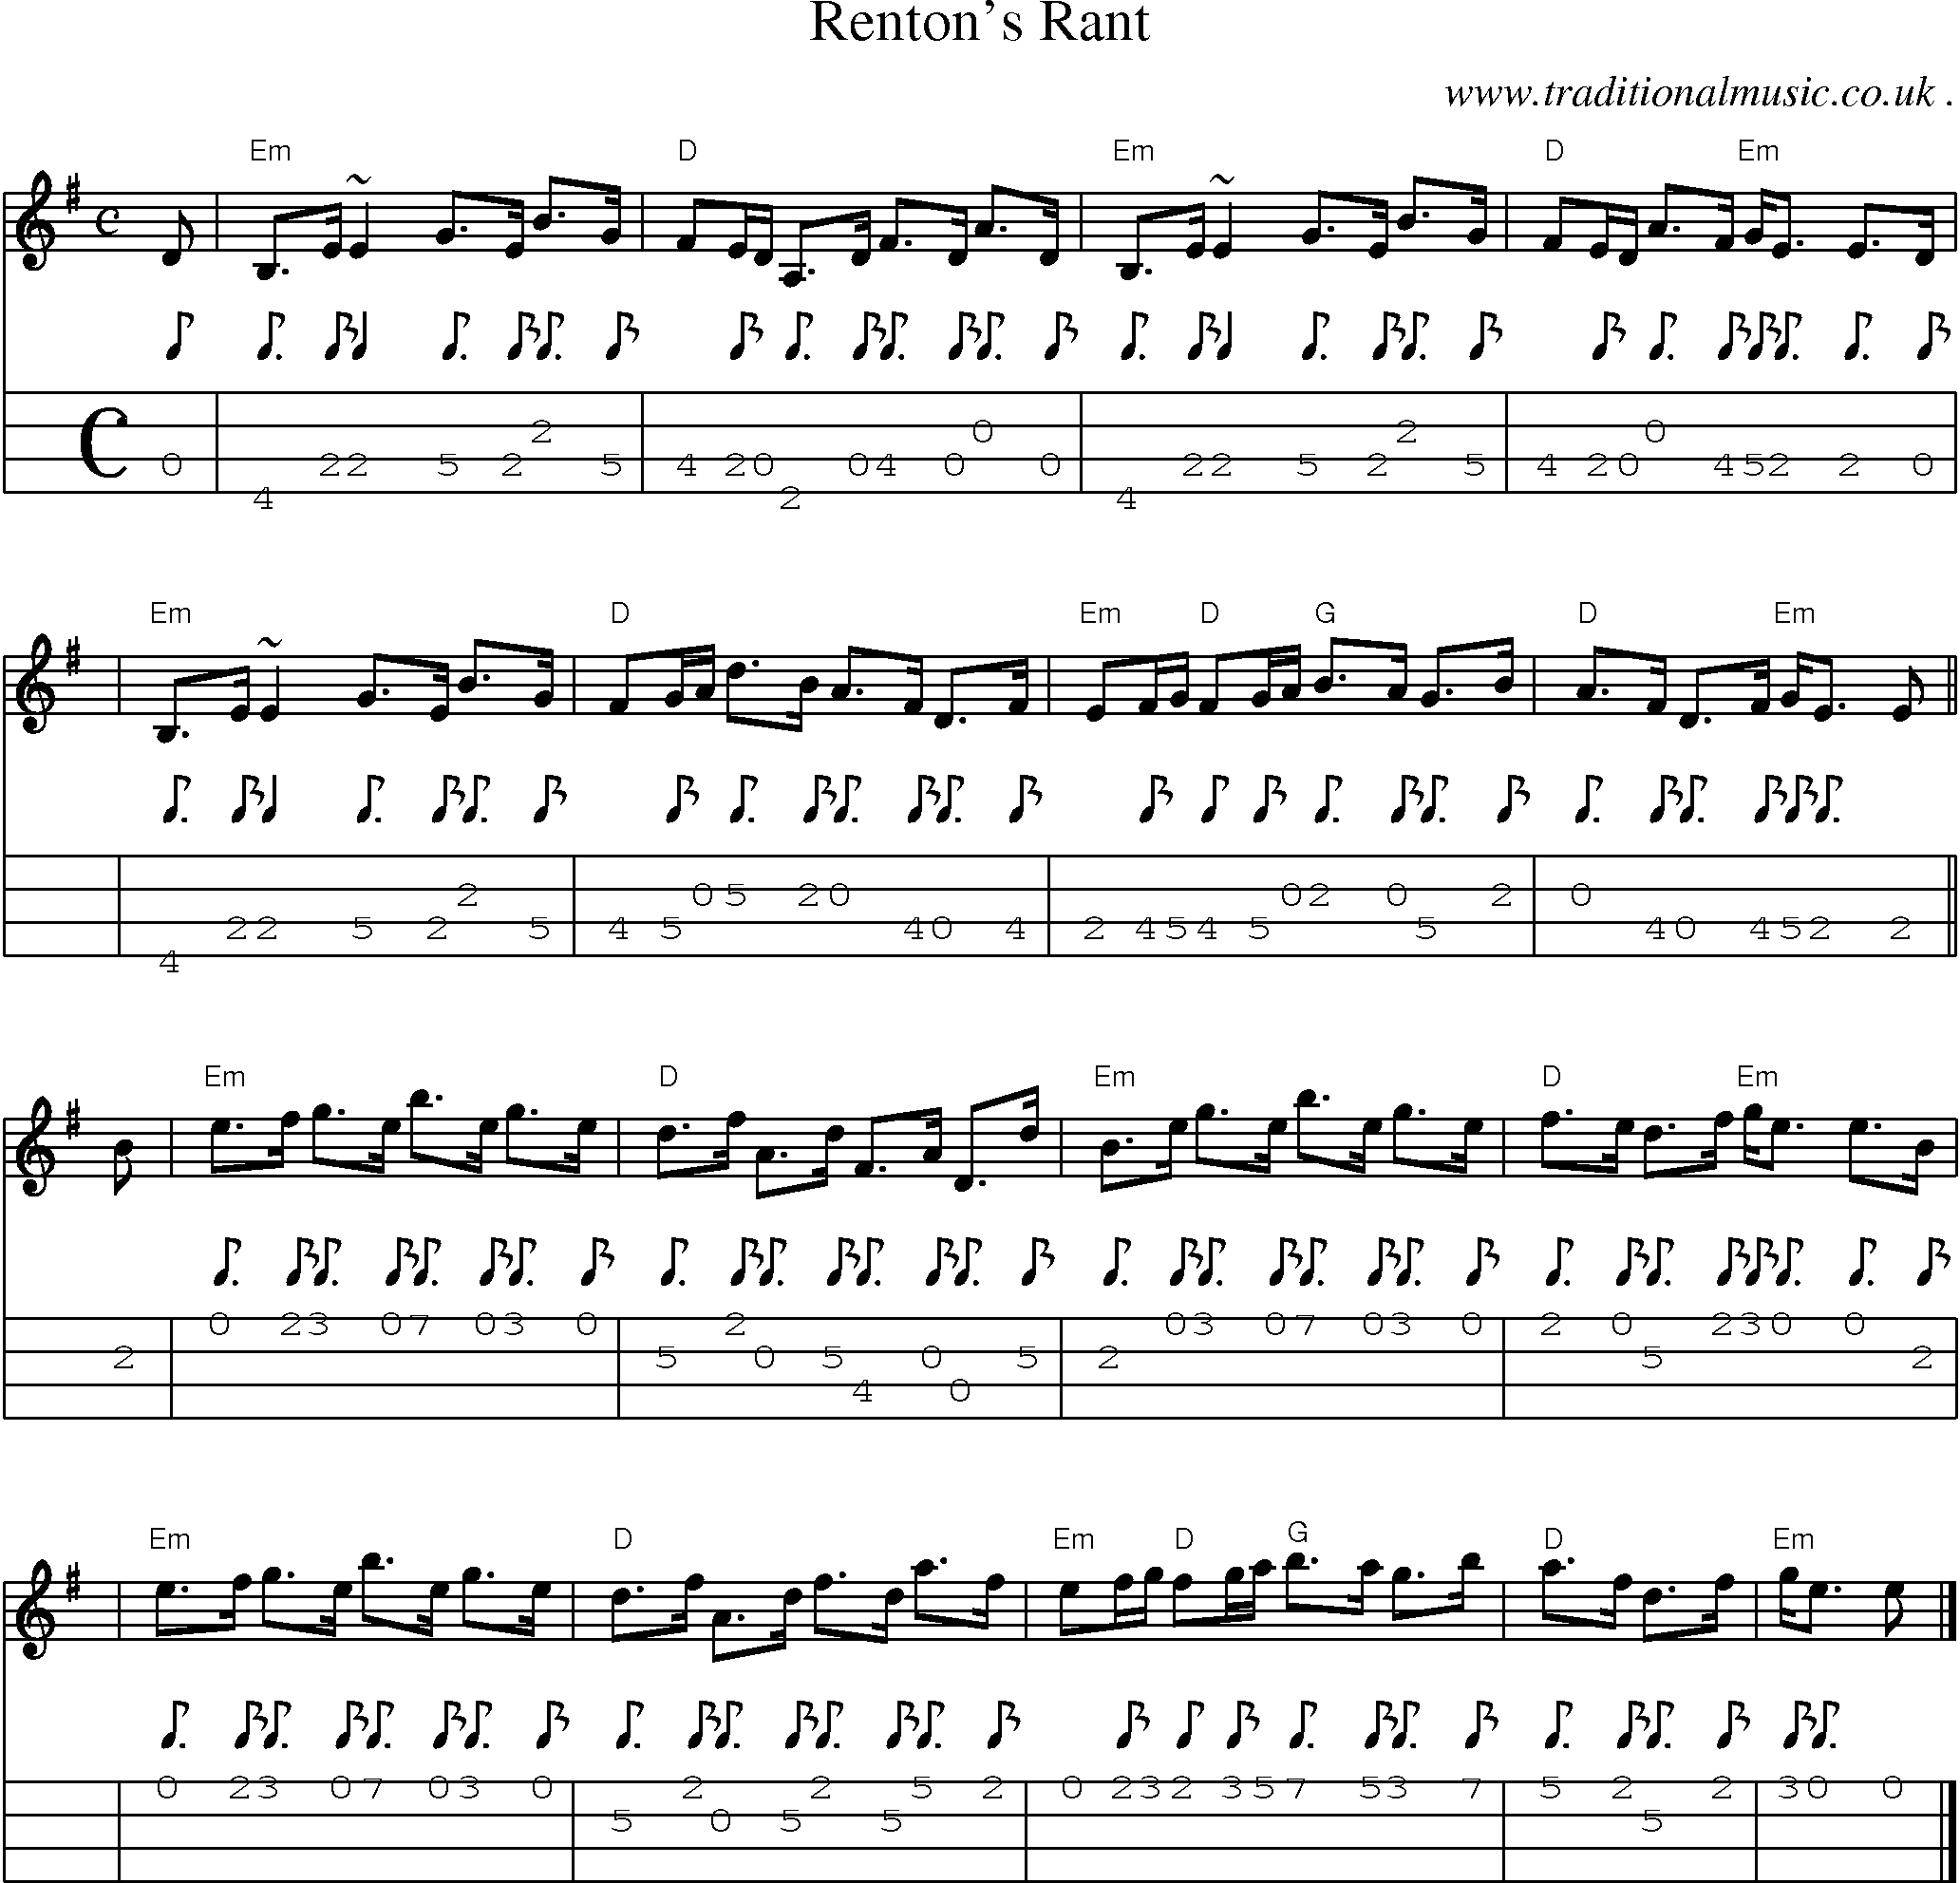 Sheet-music  score, Chords and Mandolin Tabs for Rentons Rant